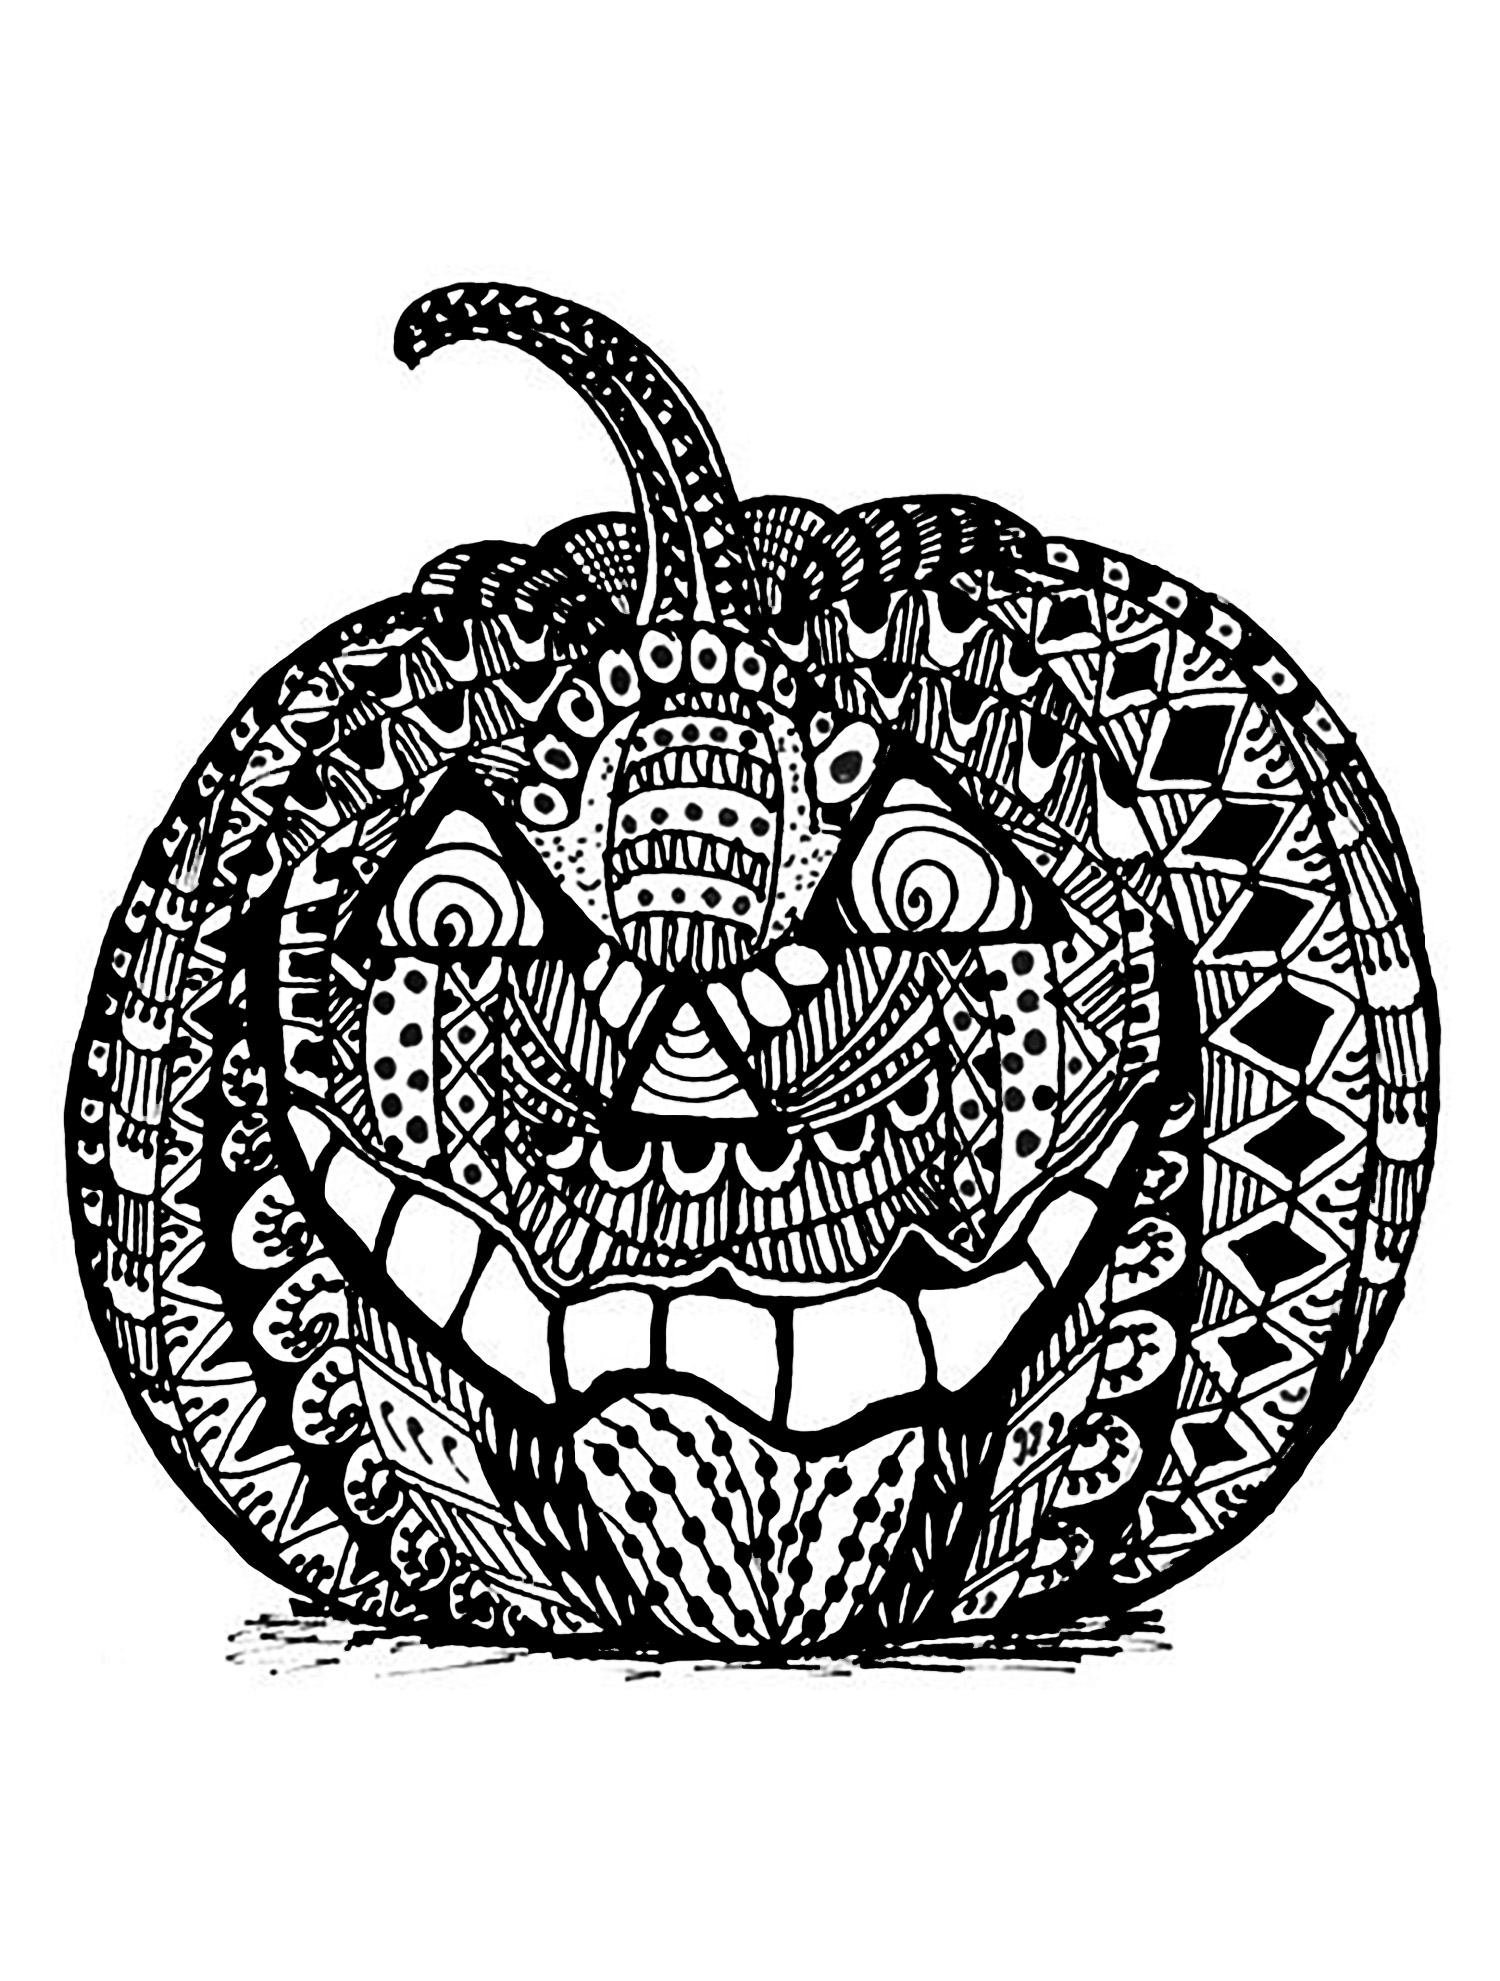 Halloween Pumpkin Coloring Pages Printables Coloring Books 49 Pumpkin Coloring Pages For Adults Image